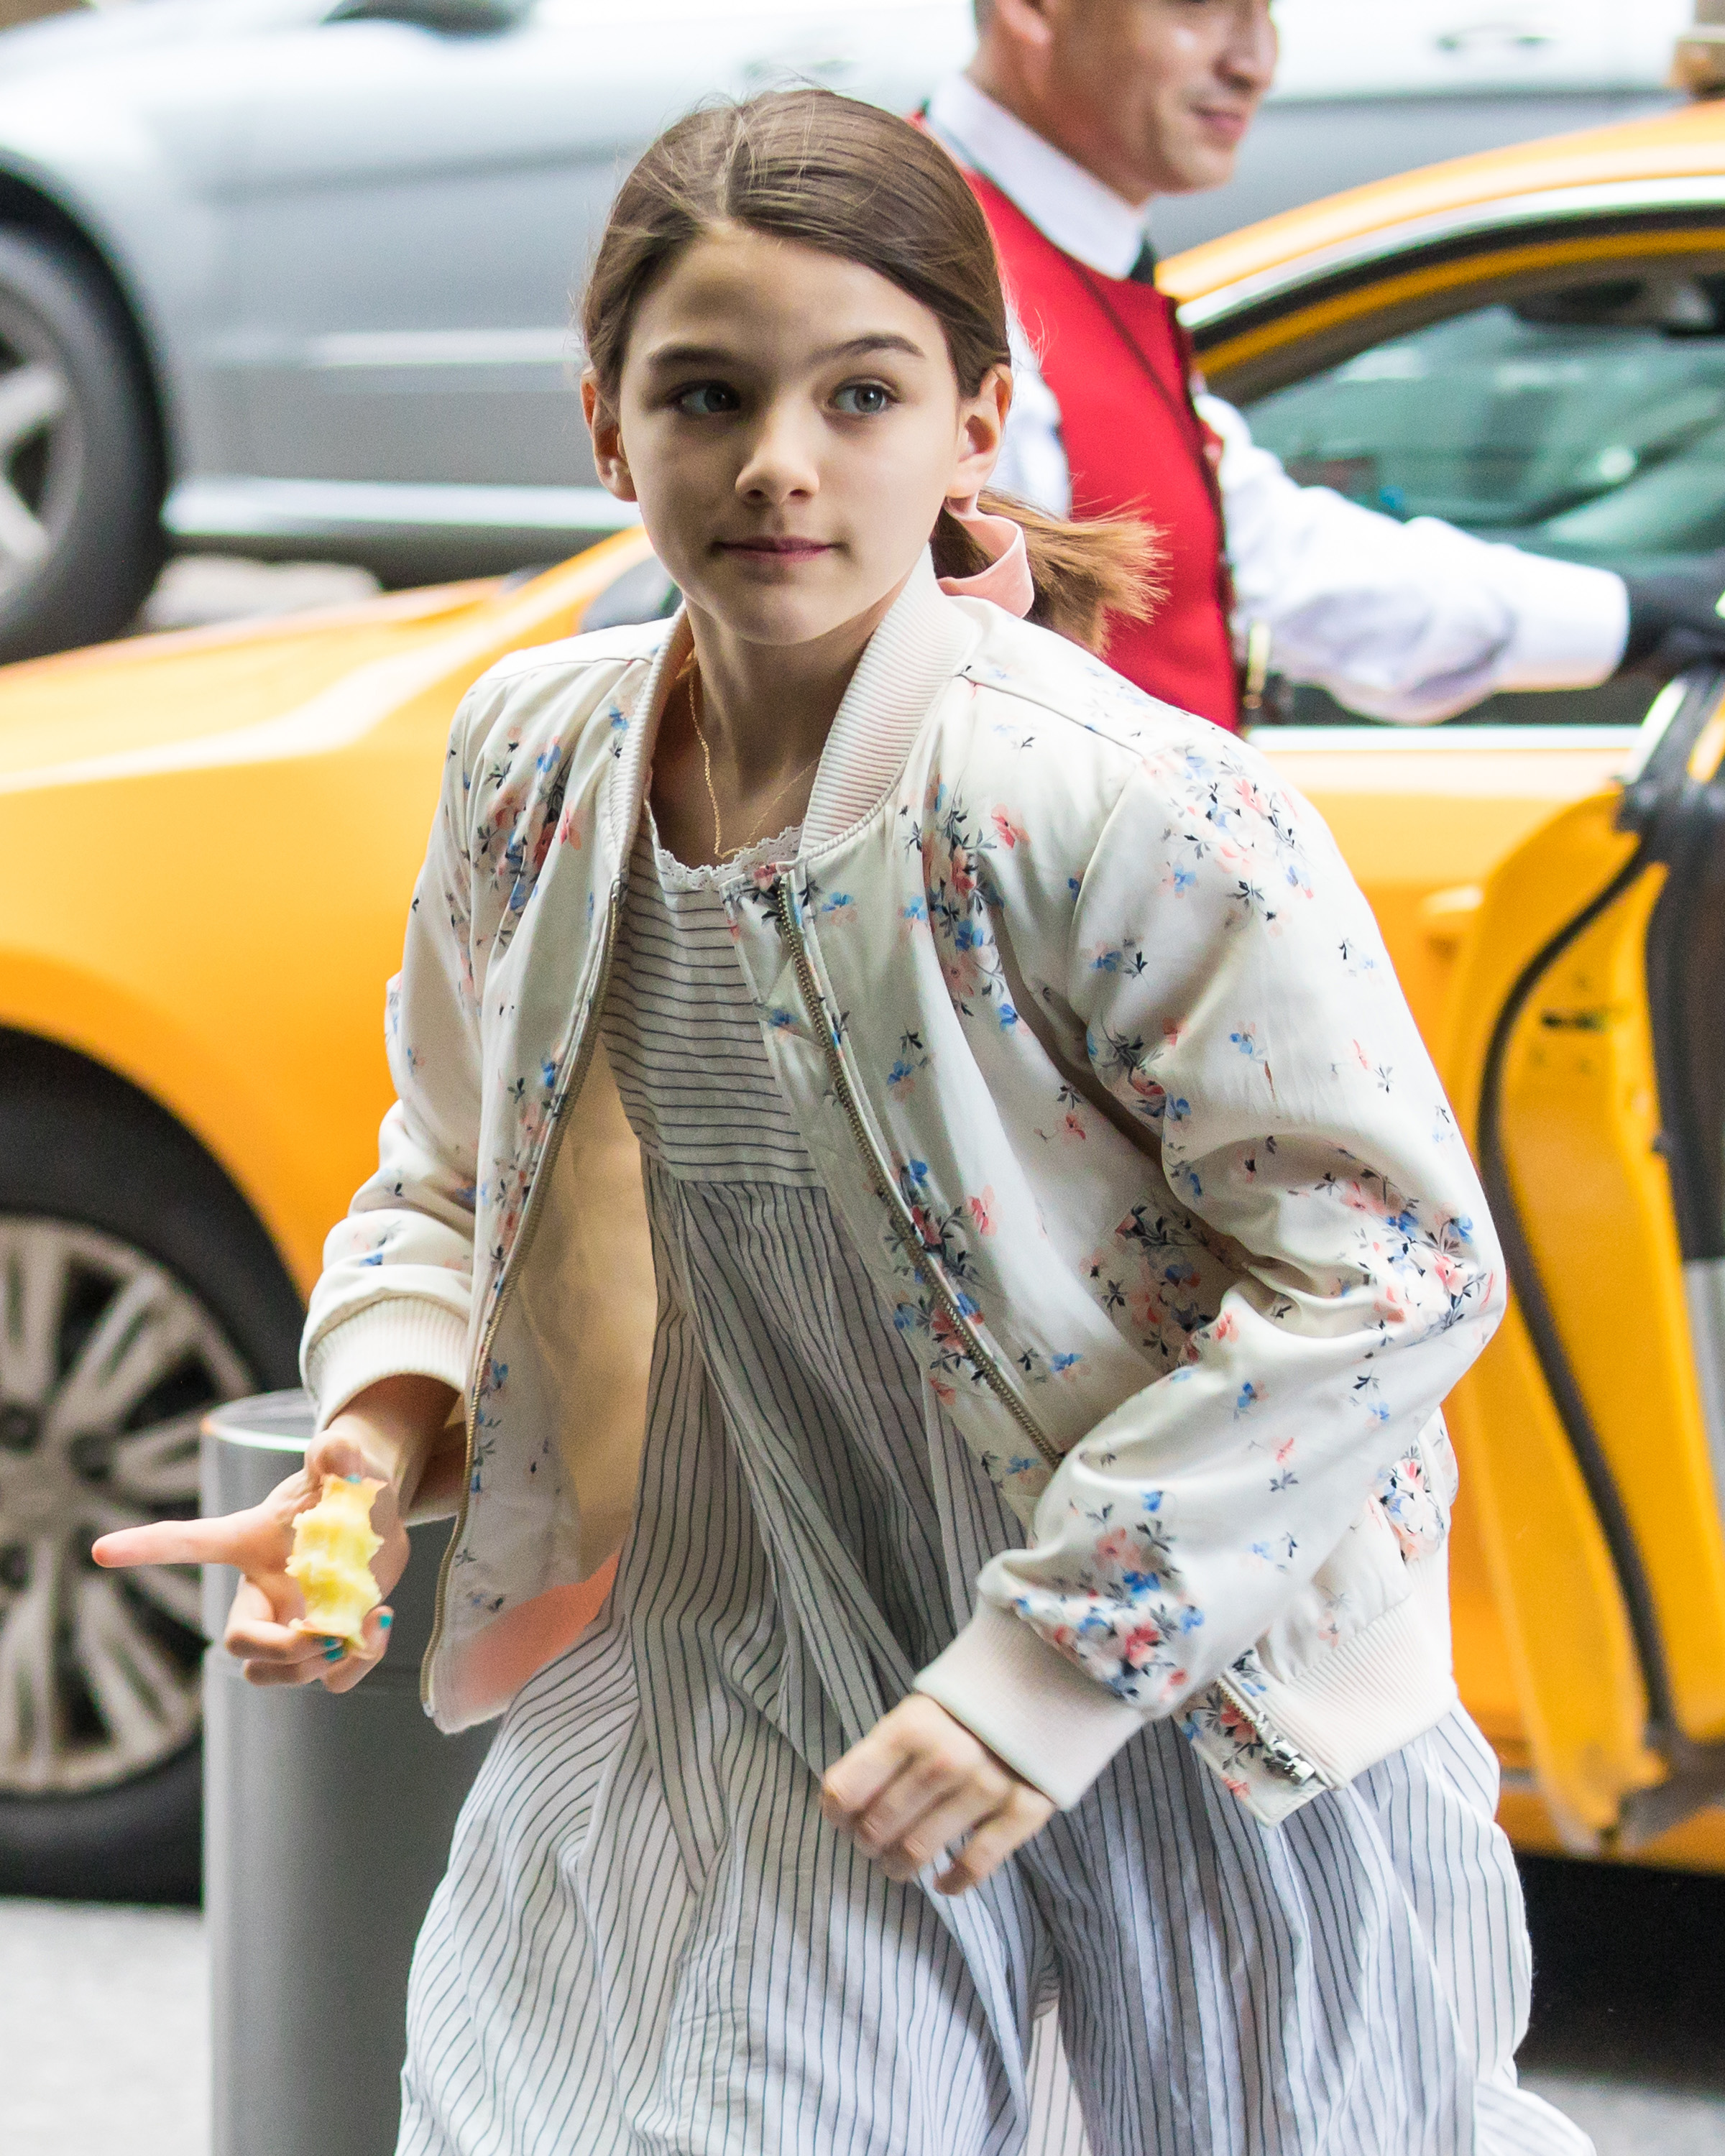 Suri Cruise is seen arriving at her hotel on April 28, 2018, in New York City. | Source: Getty Images